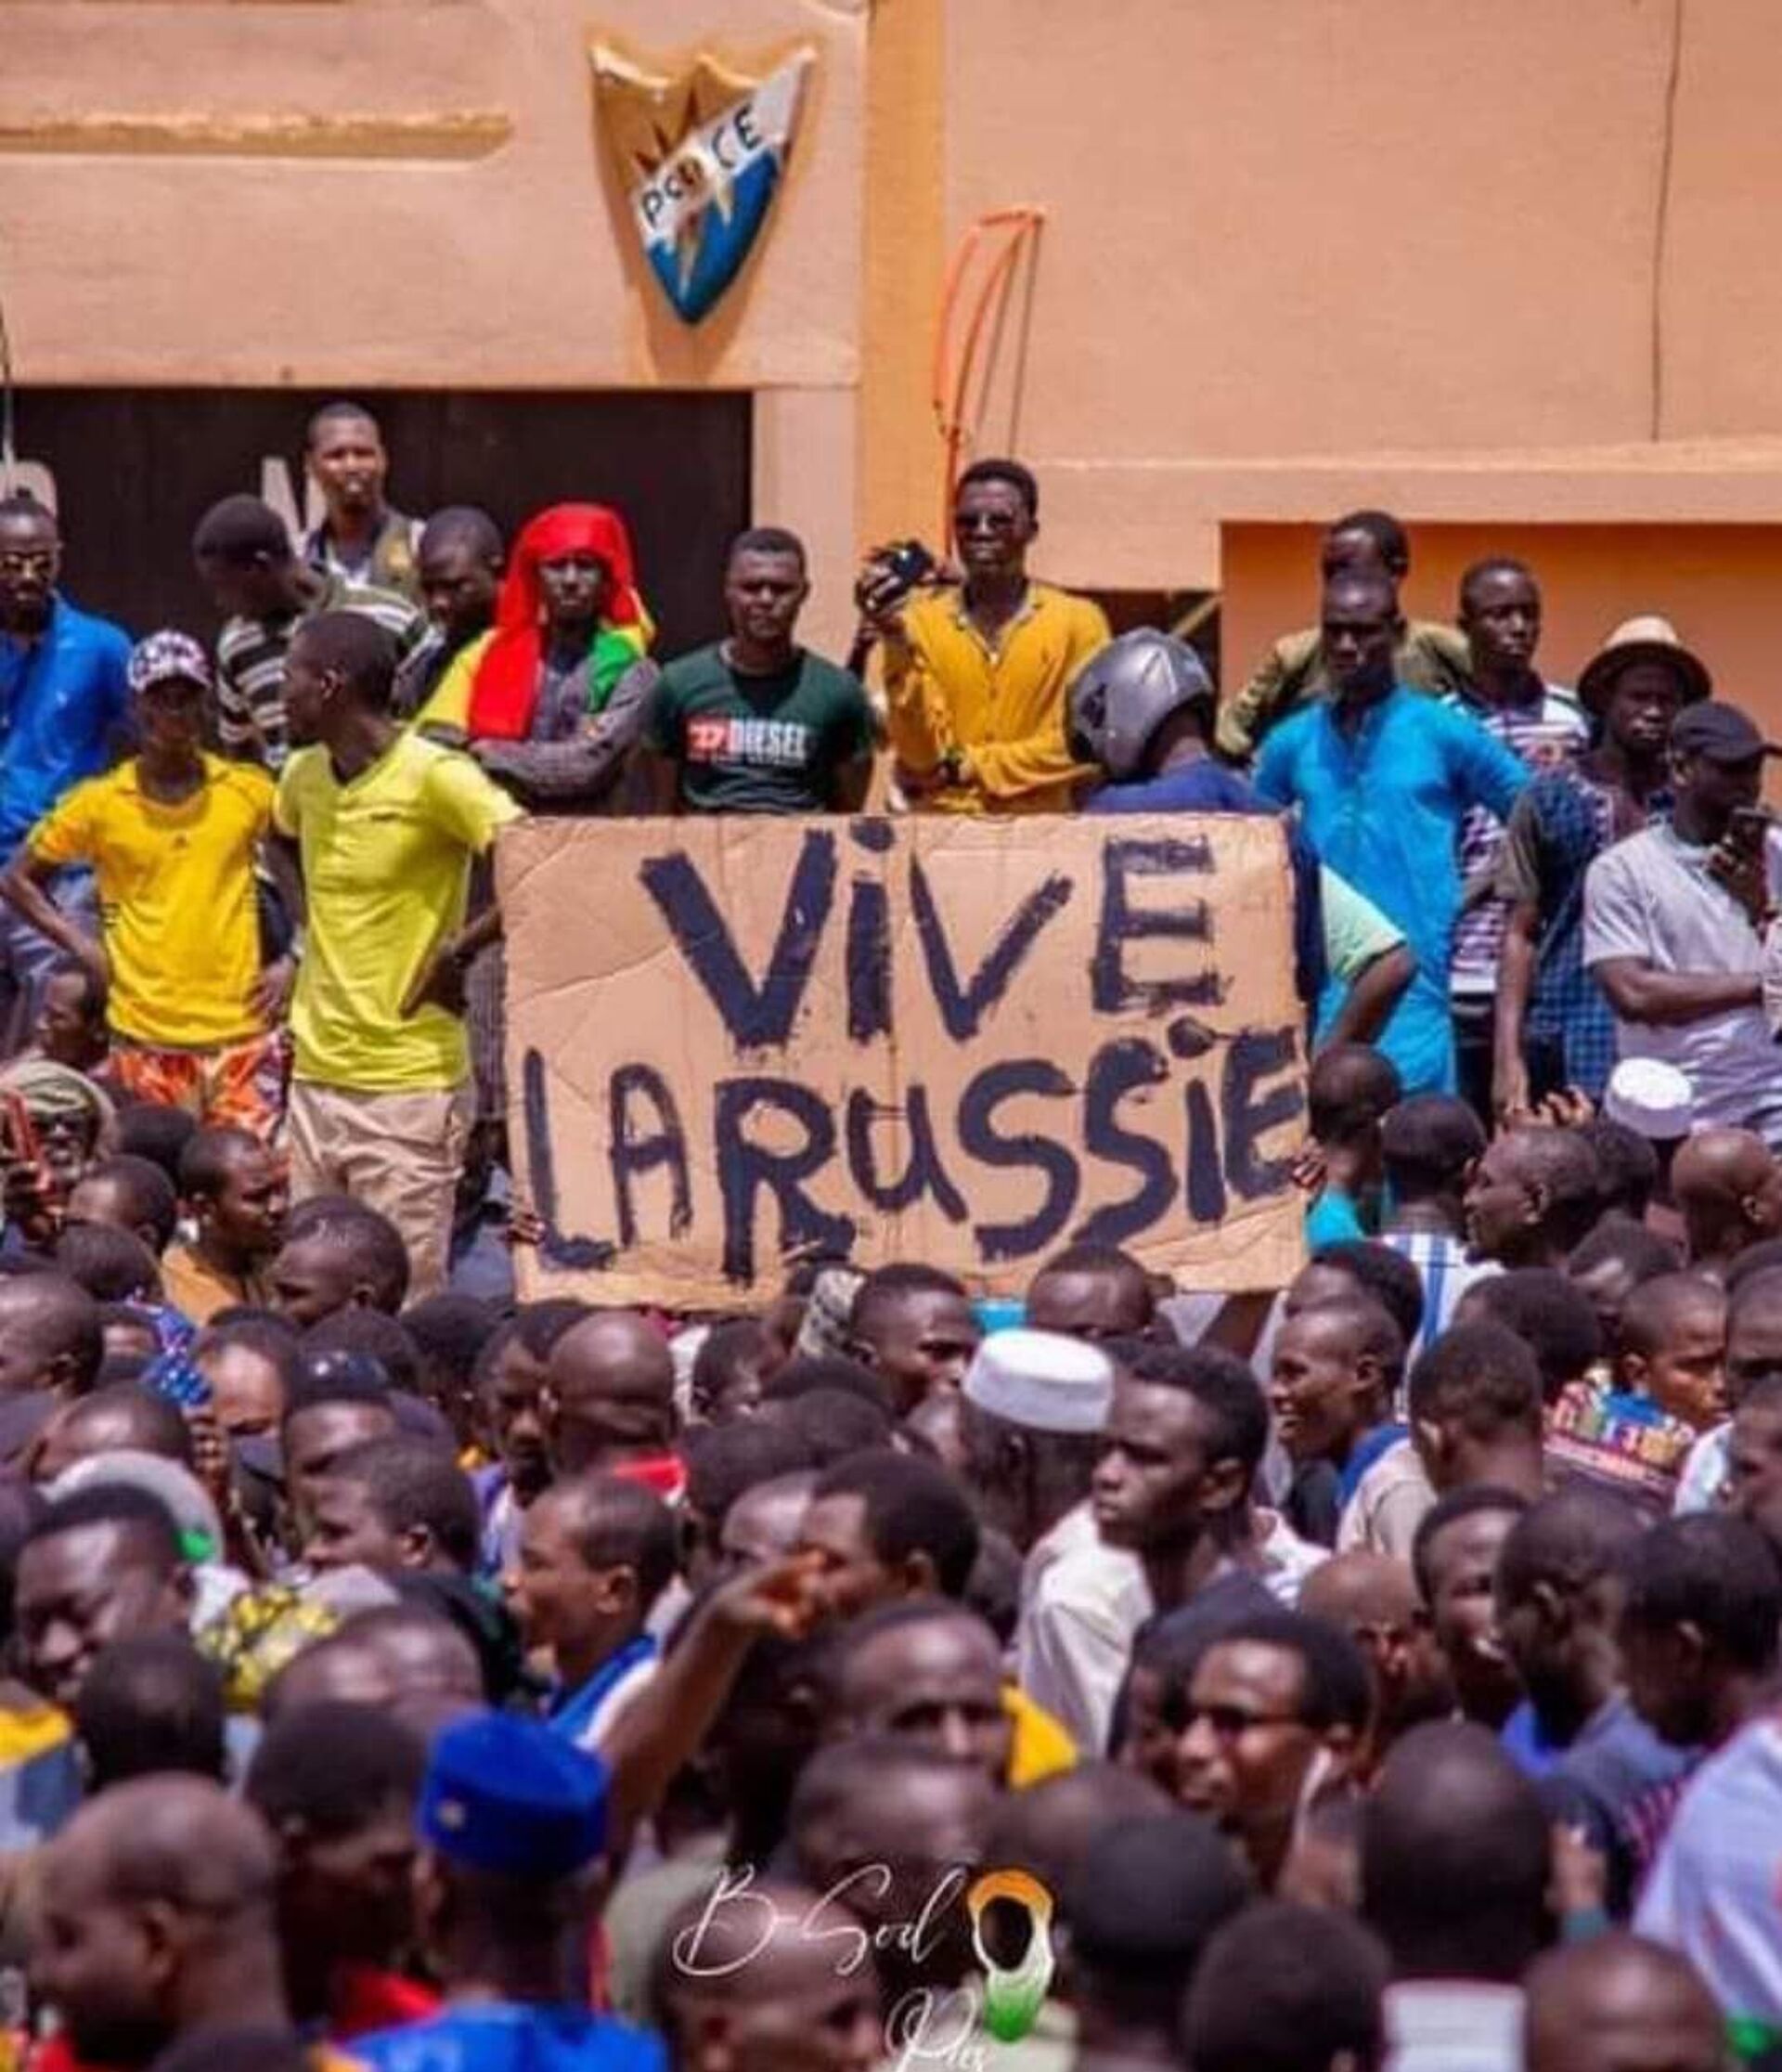 Protesters in Niger with banners Long live Russia. - Sputnik Africa, 1920, 11.08.2023